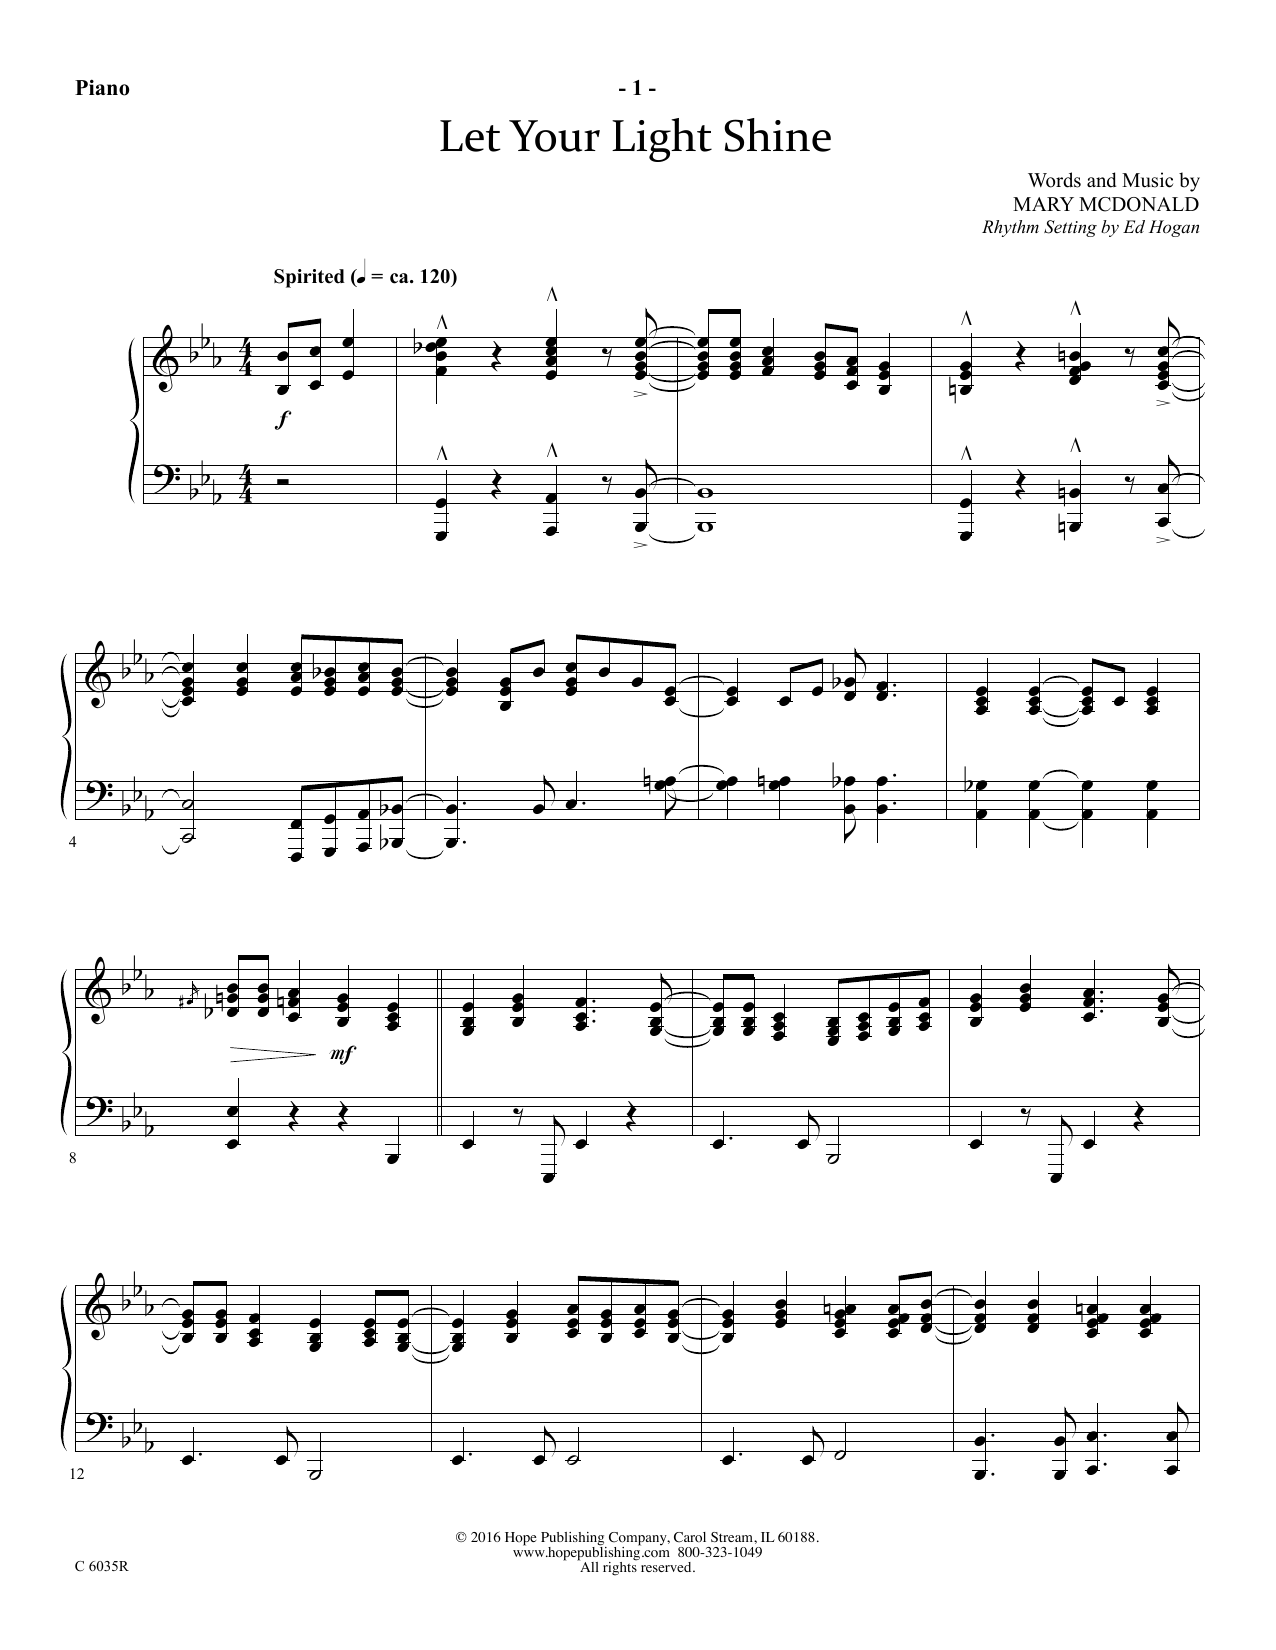 Download Mary McDonald Let Your Light Shine - Piano Sheet Music